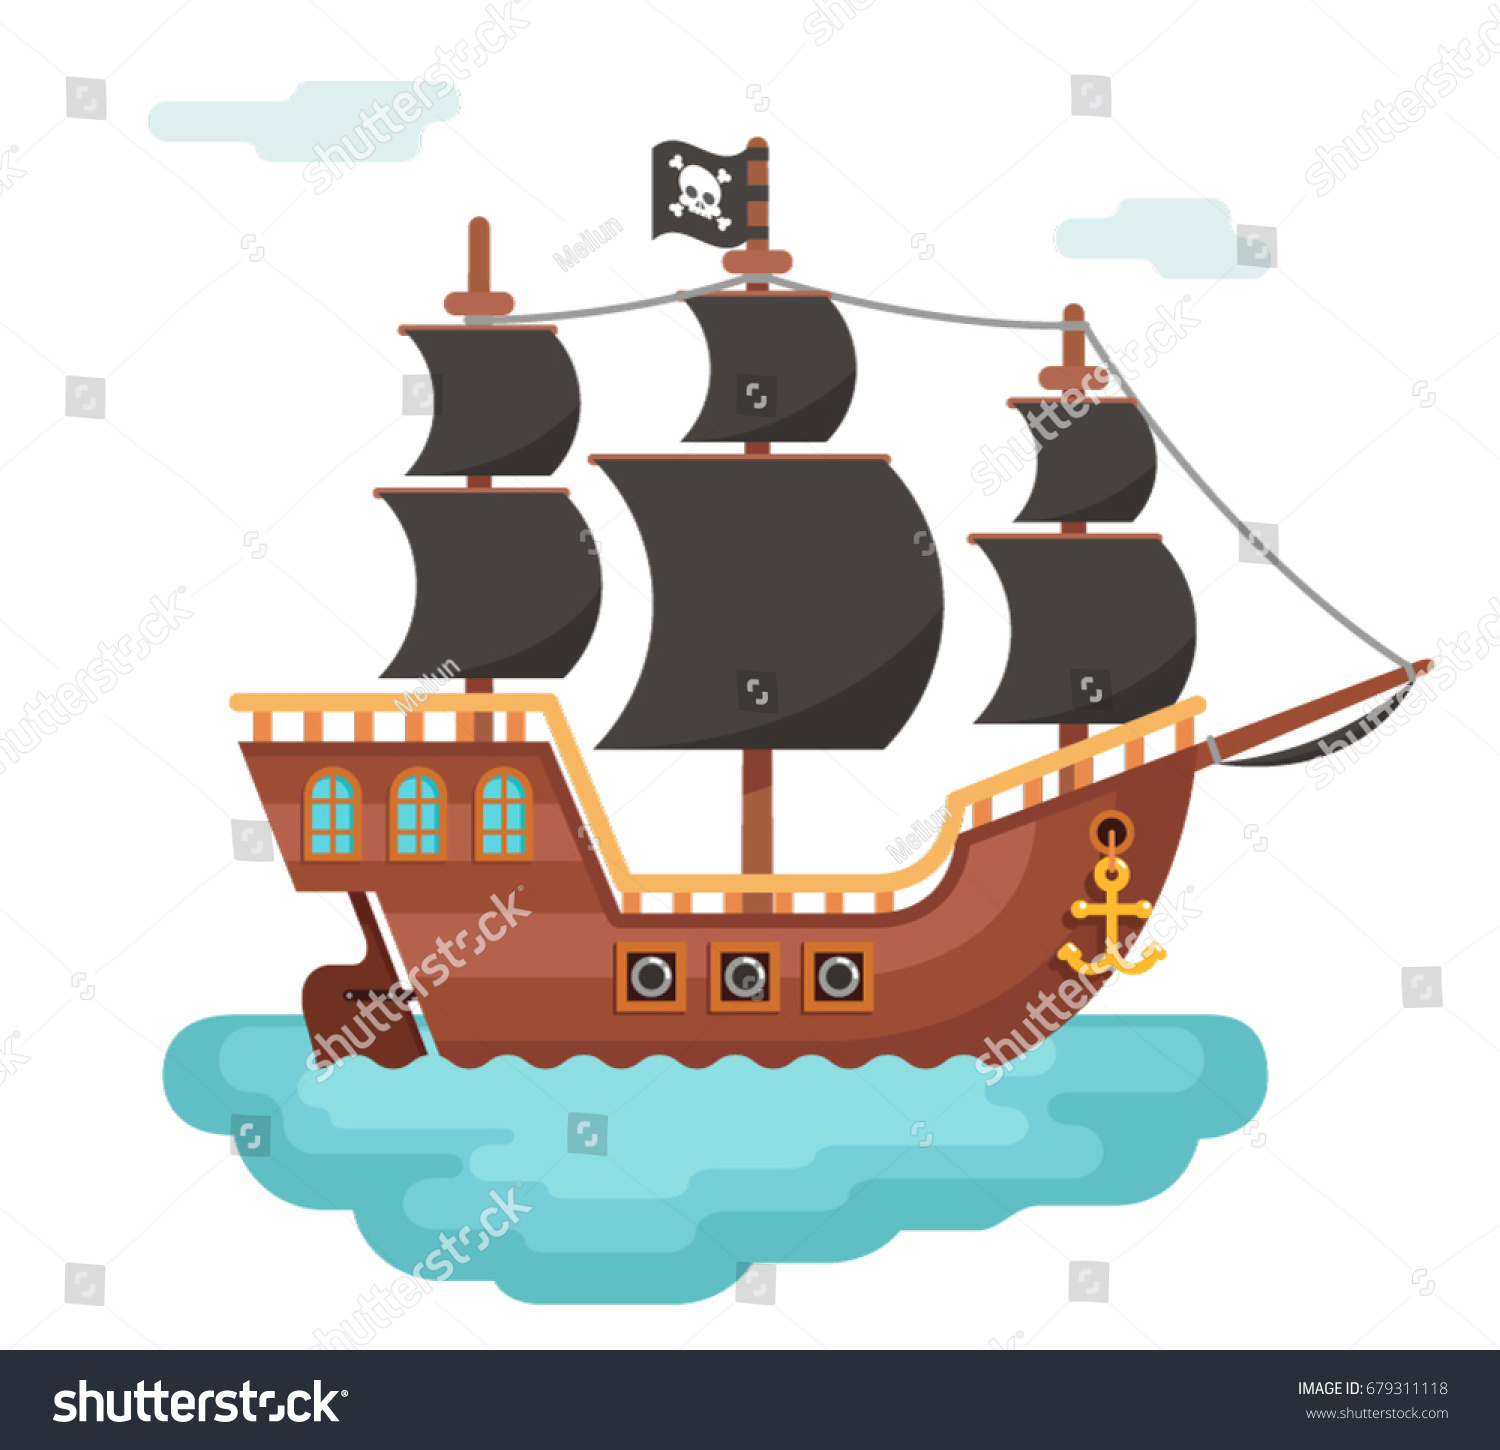 SVG of Wooden pirate buccaneer filibuster corsair sea dog ship icon game isolated flat design vector illustration svg